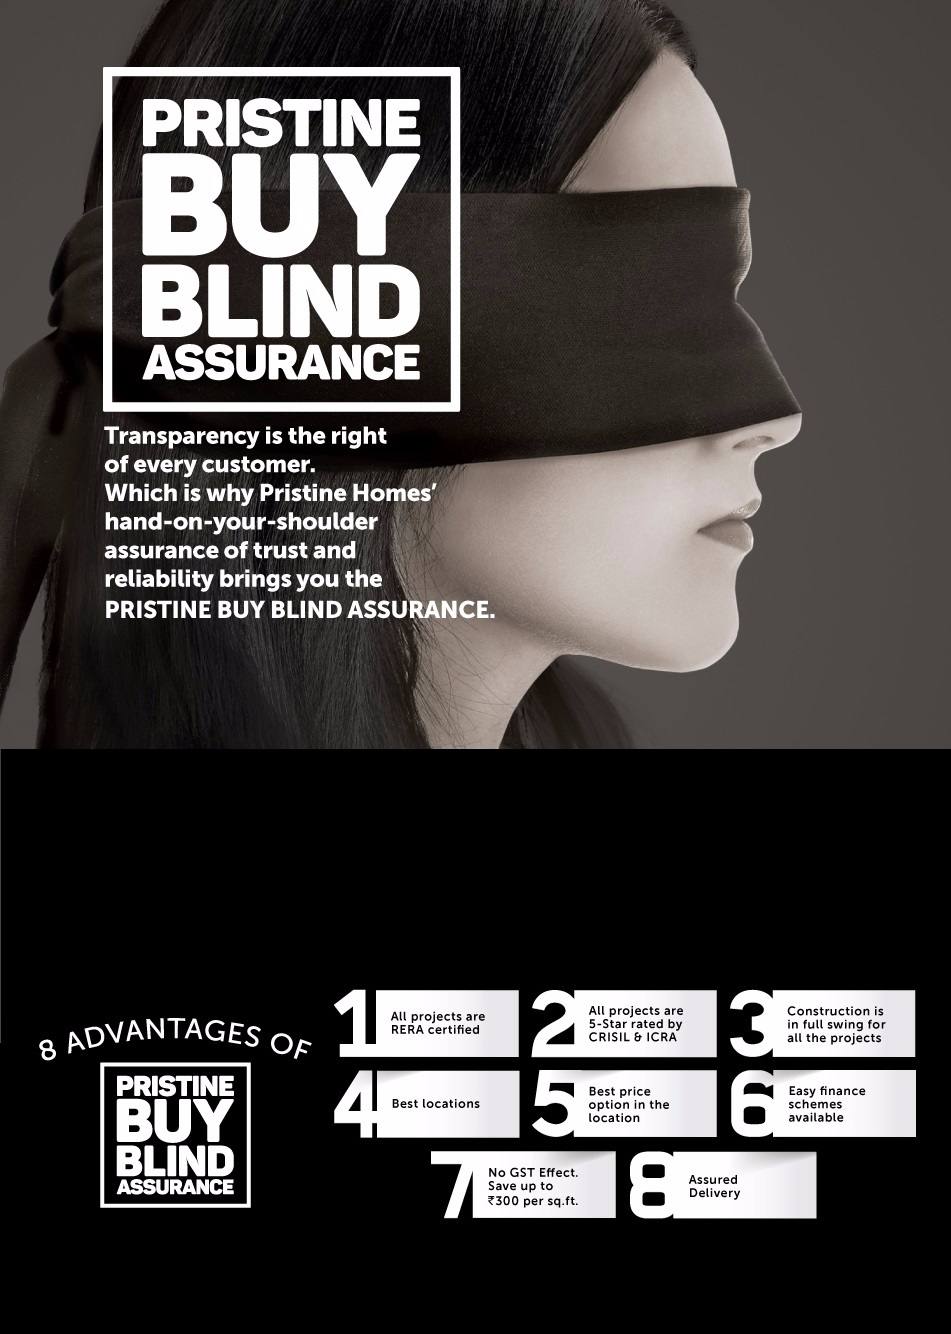 Pristine buy blind assurance and its 8 advantages Update